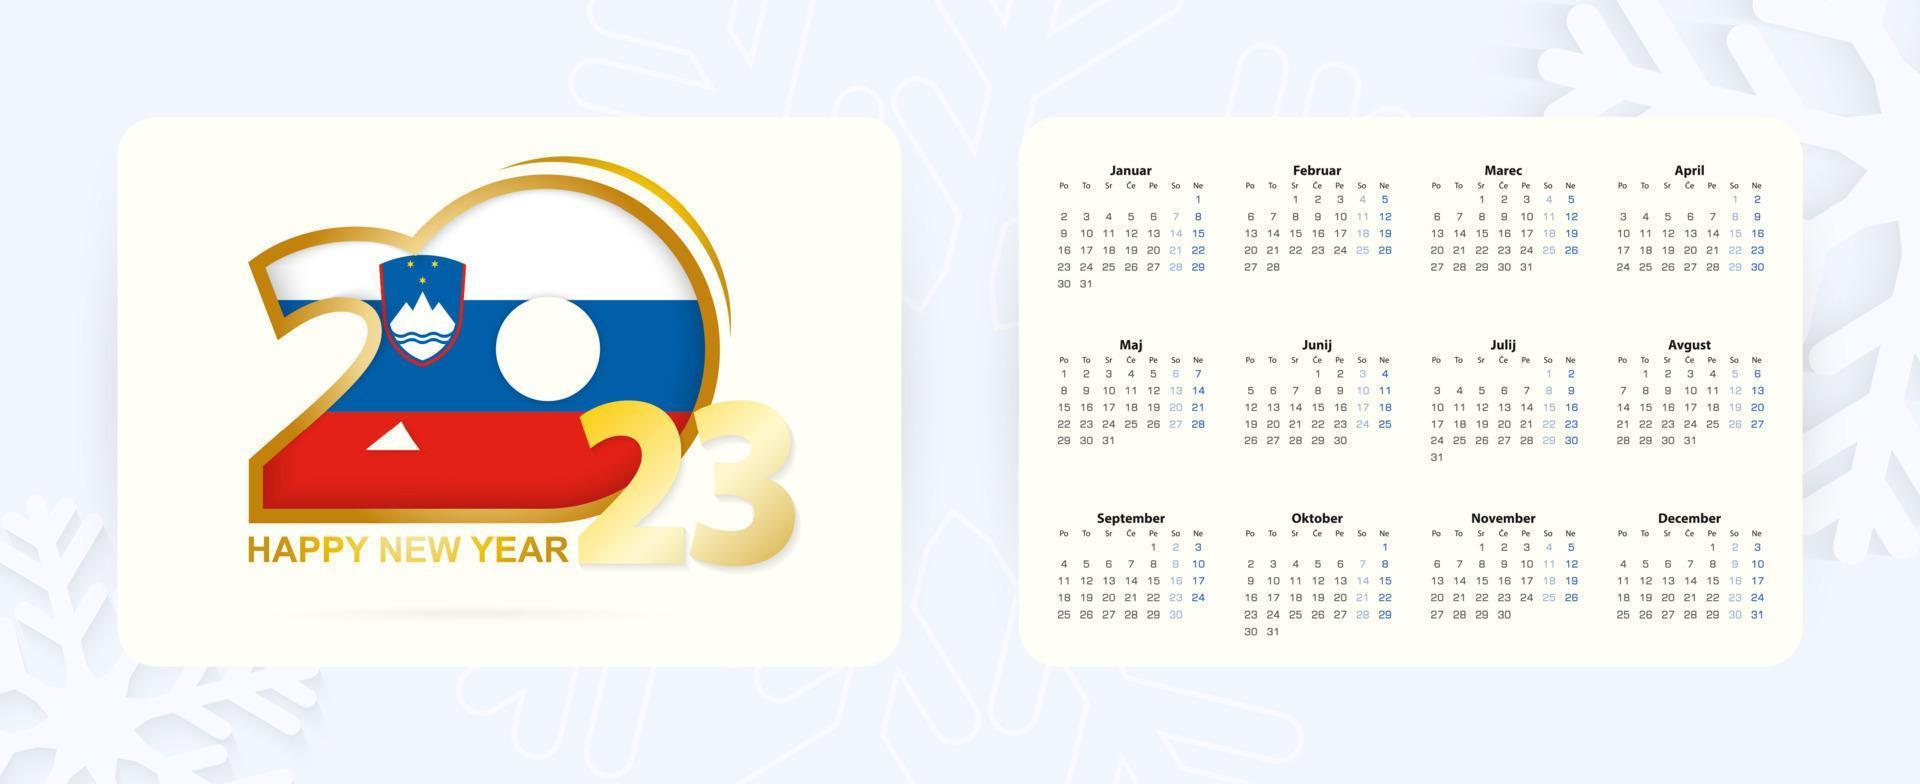 Horizontal Pocket Calendar 2023 in Slovenian language. New Year 2023 icon with flag of Slovenia. vector